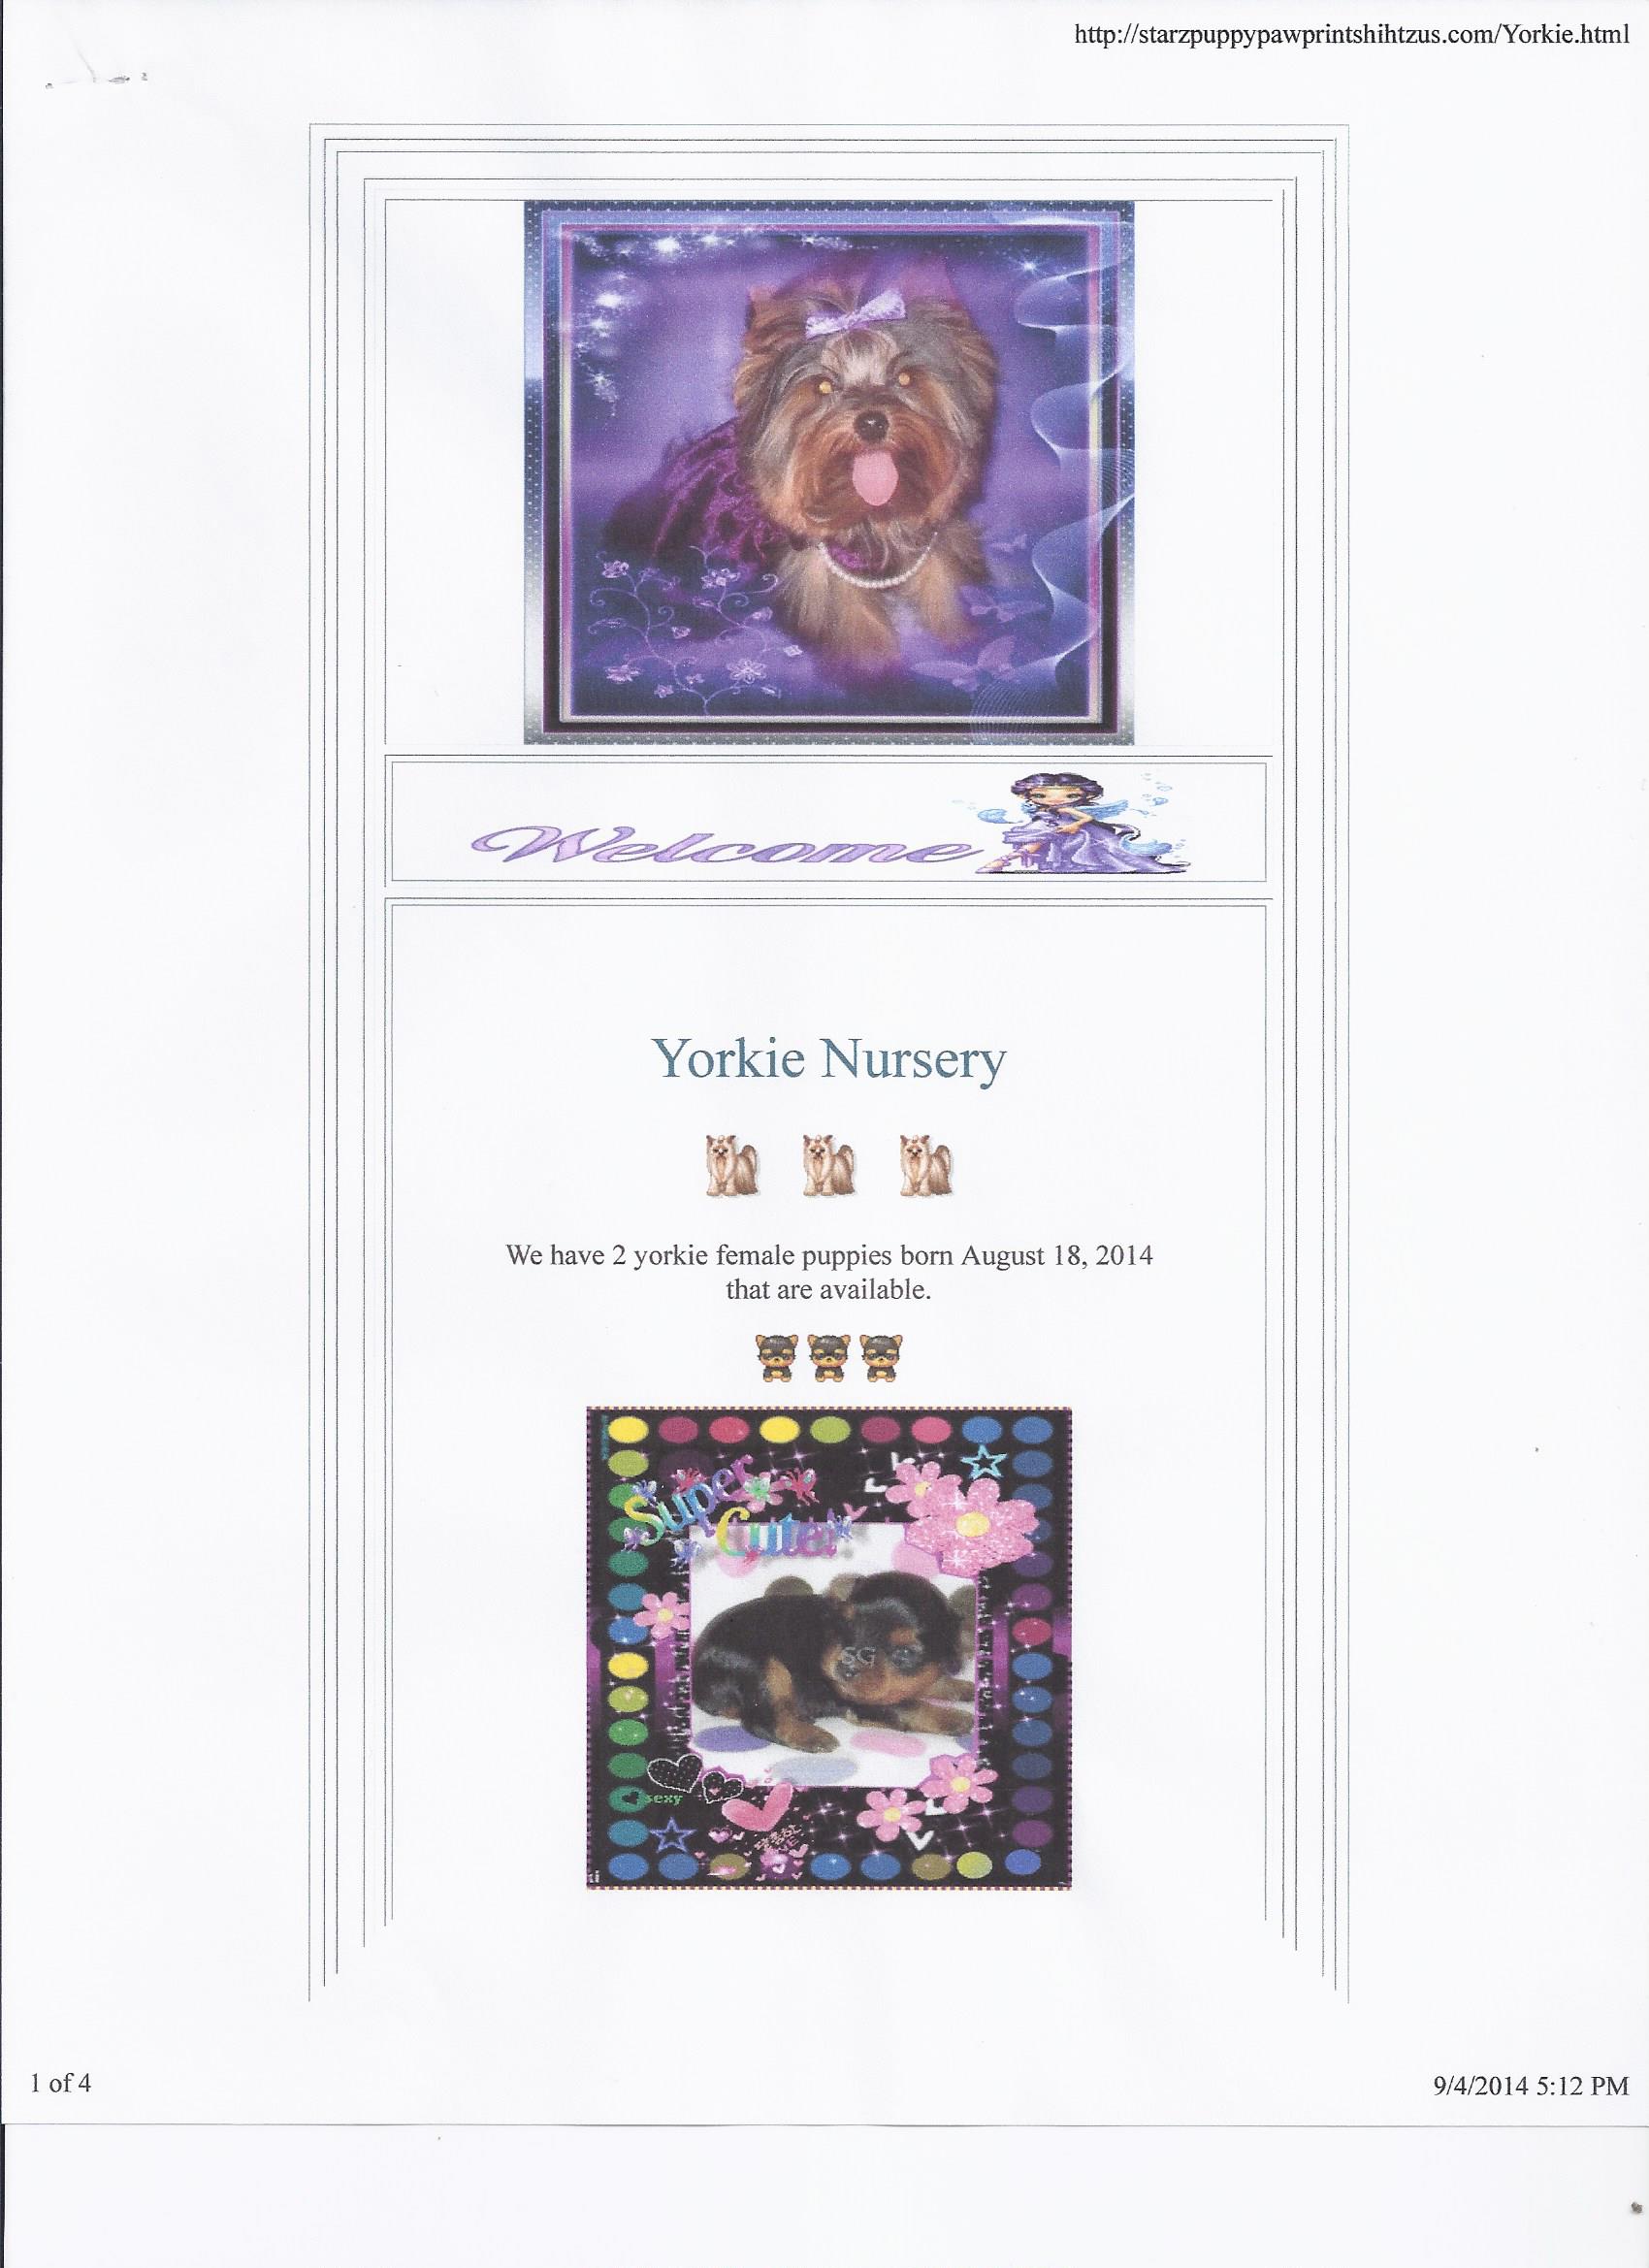 Yorkie page showing only two Yorkie's were born now instead of three.